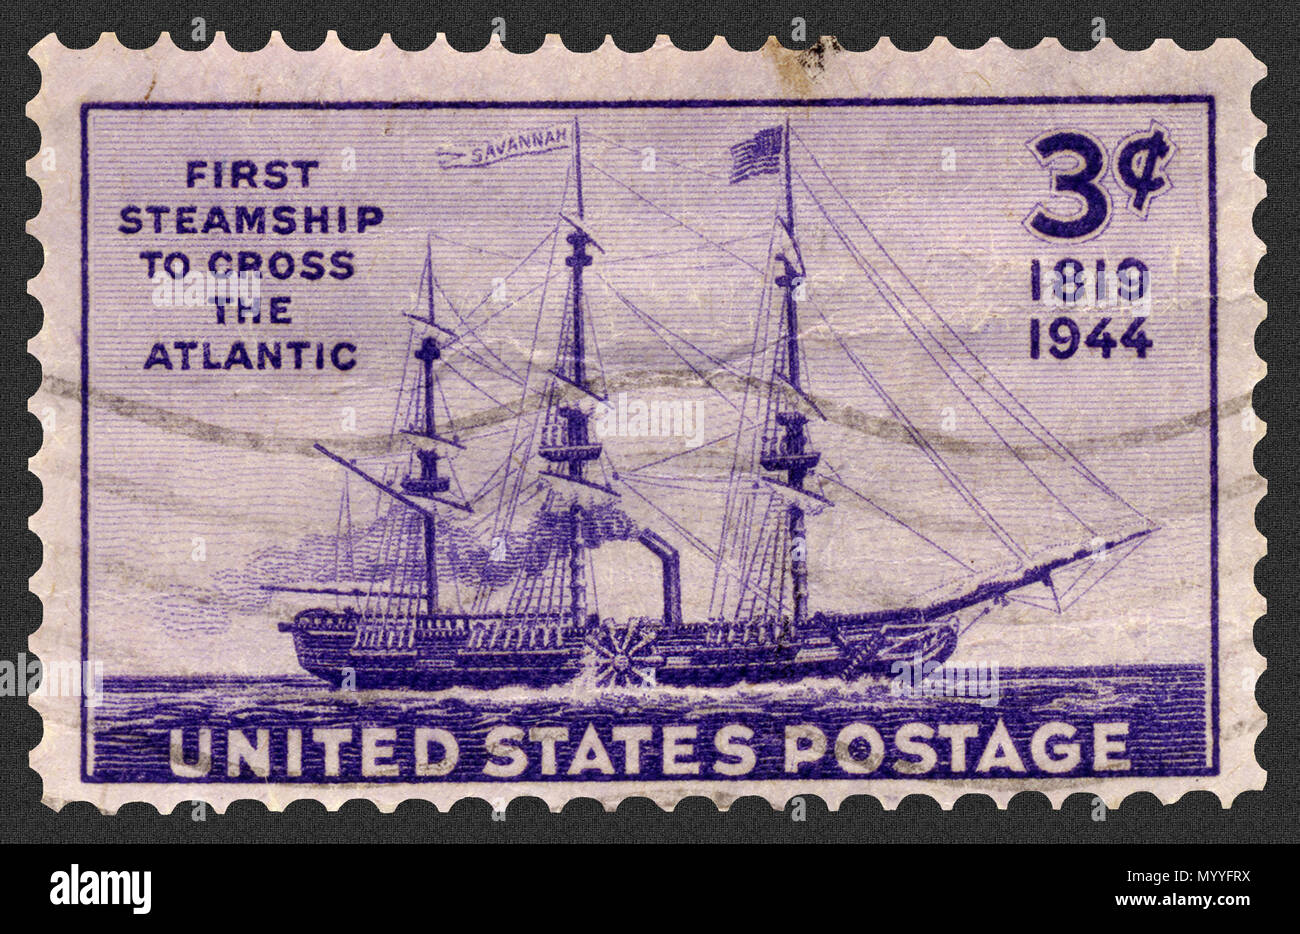 S.S. Savannah: First Steamship to Cross the Atlantic Postage Stamp First steamship to cross the Atlantic. 1944 commemorative issue shows the Savannah. Stock Photo